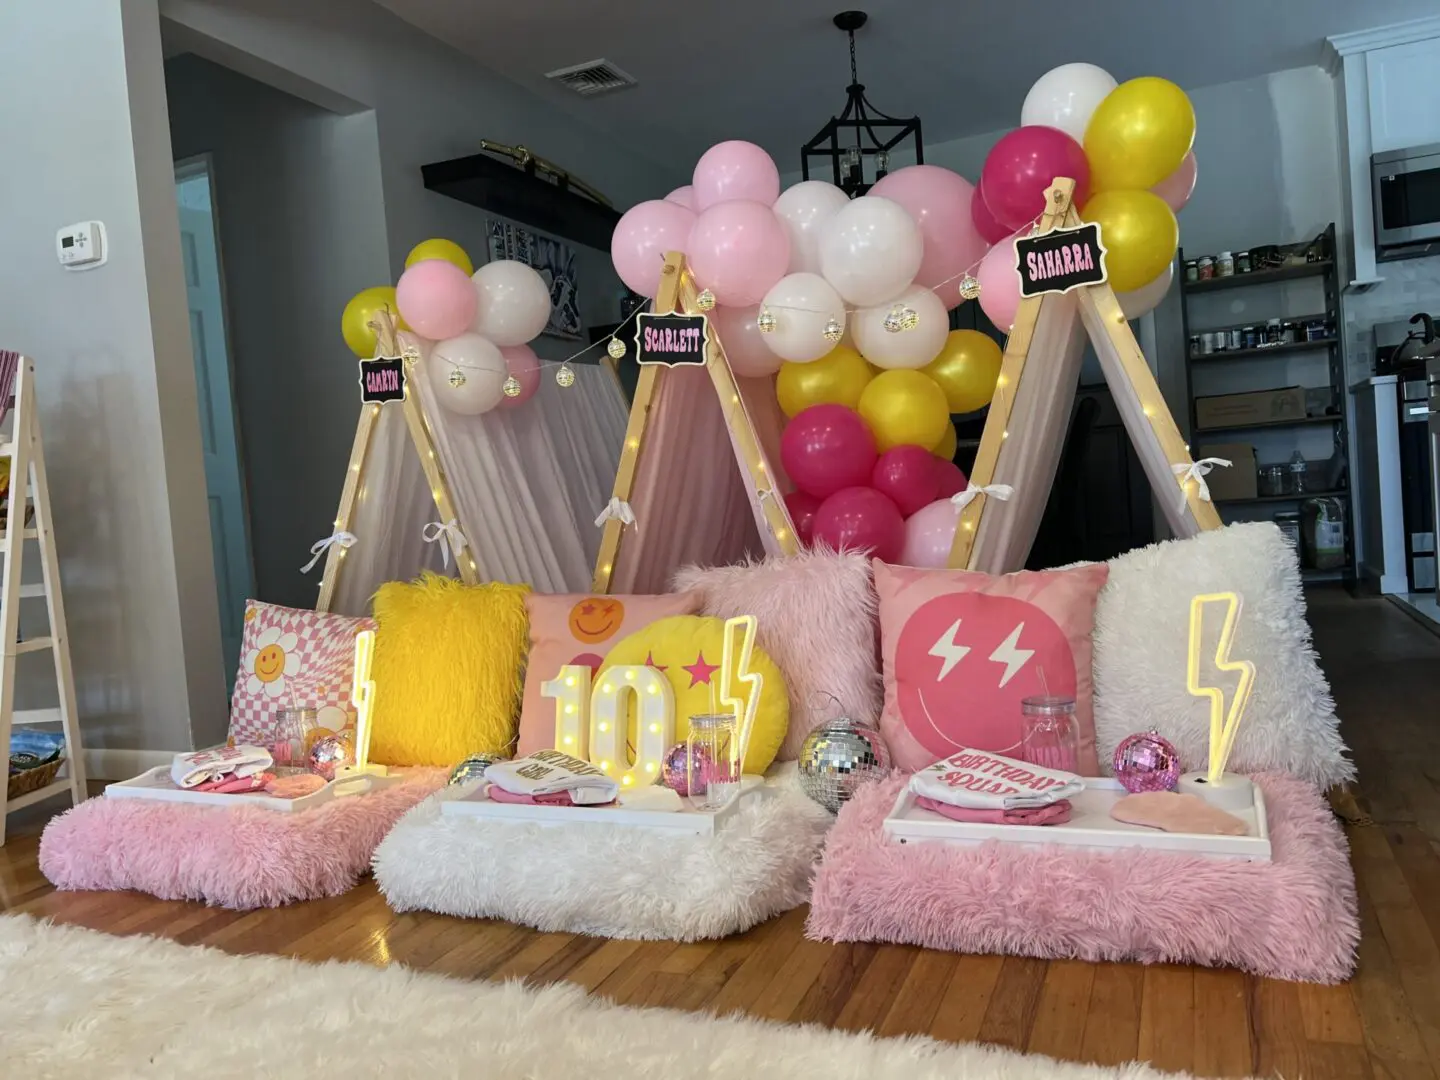 A pink and yellow teepee party with balloons and pillows.